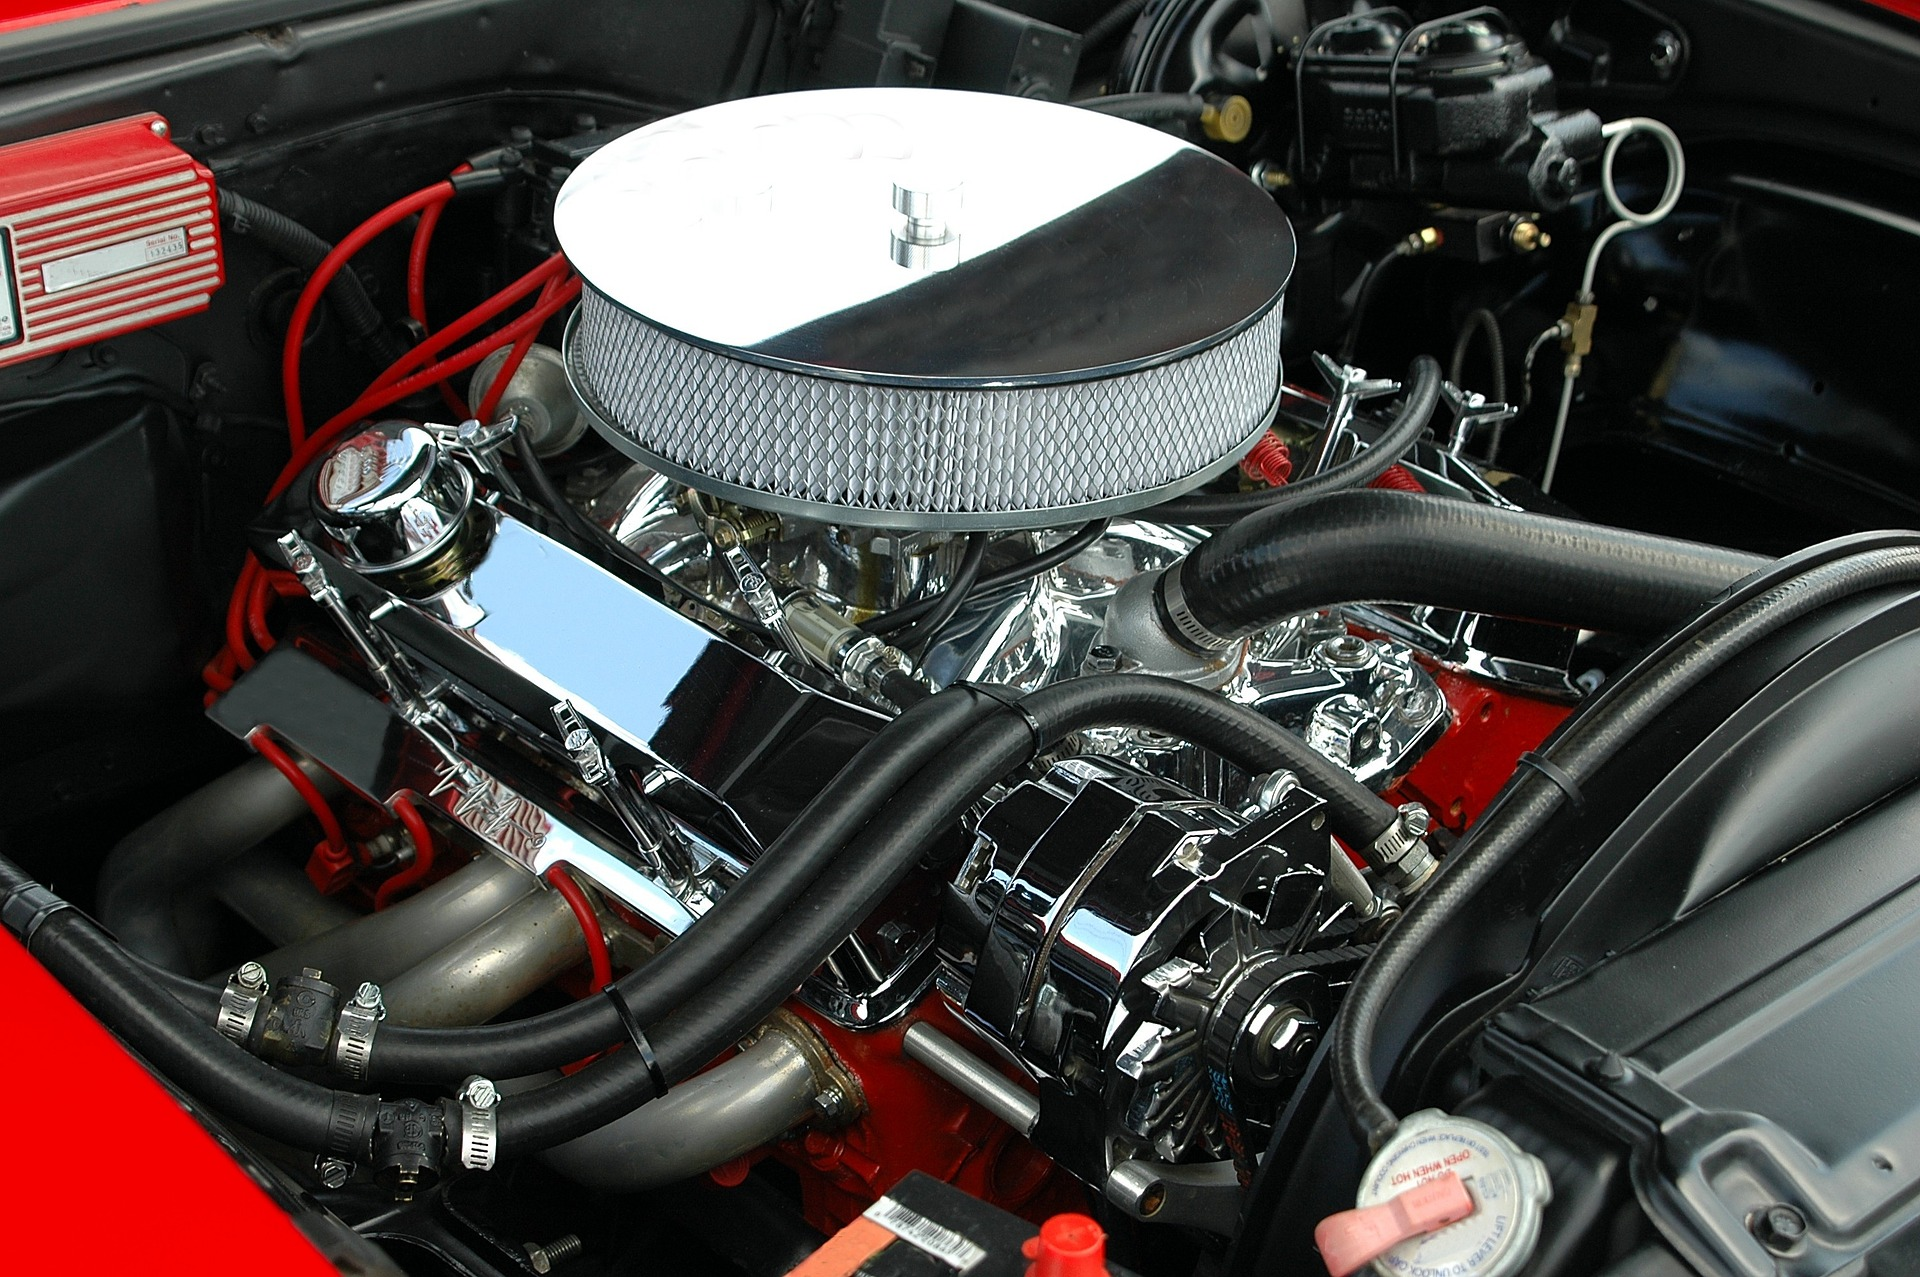 A picture inside the open hood of a 50s car. You can see that the engine is relatively simple where you can easily see all the components, especially compared to the Prius engine